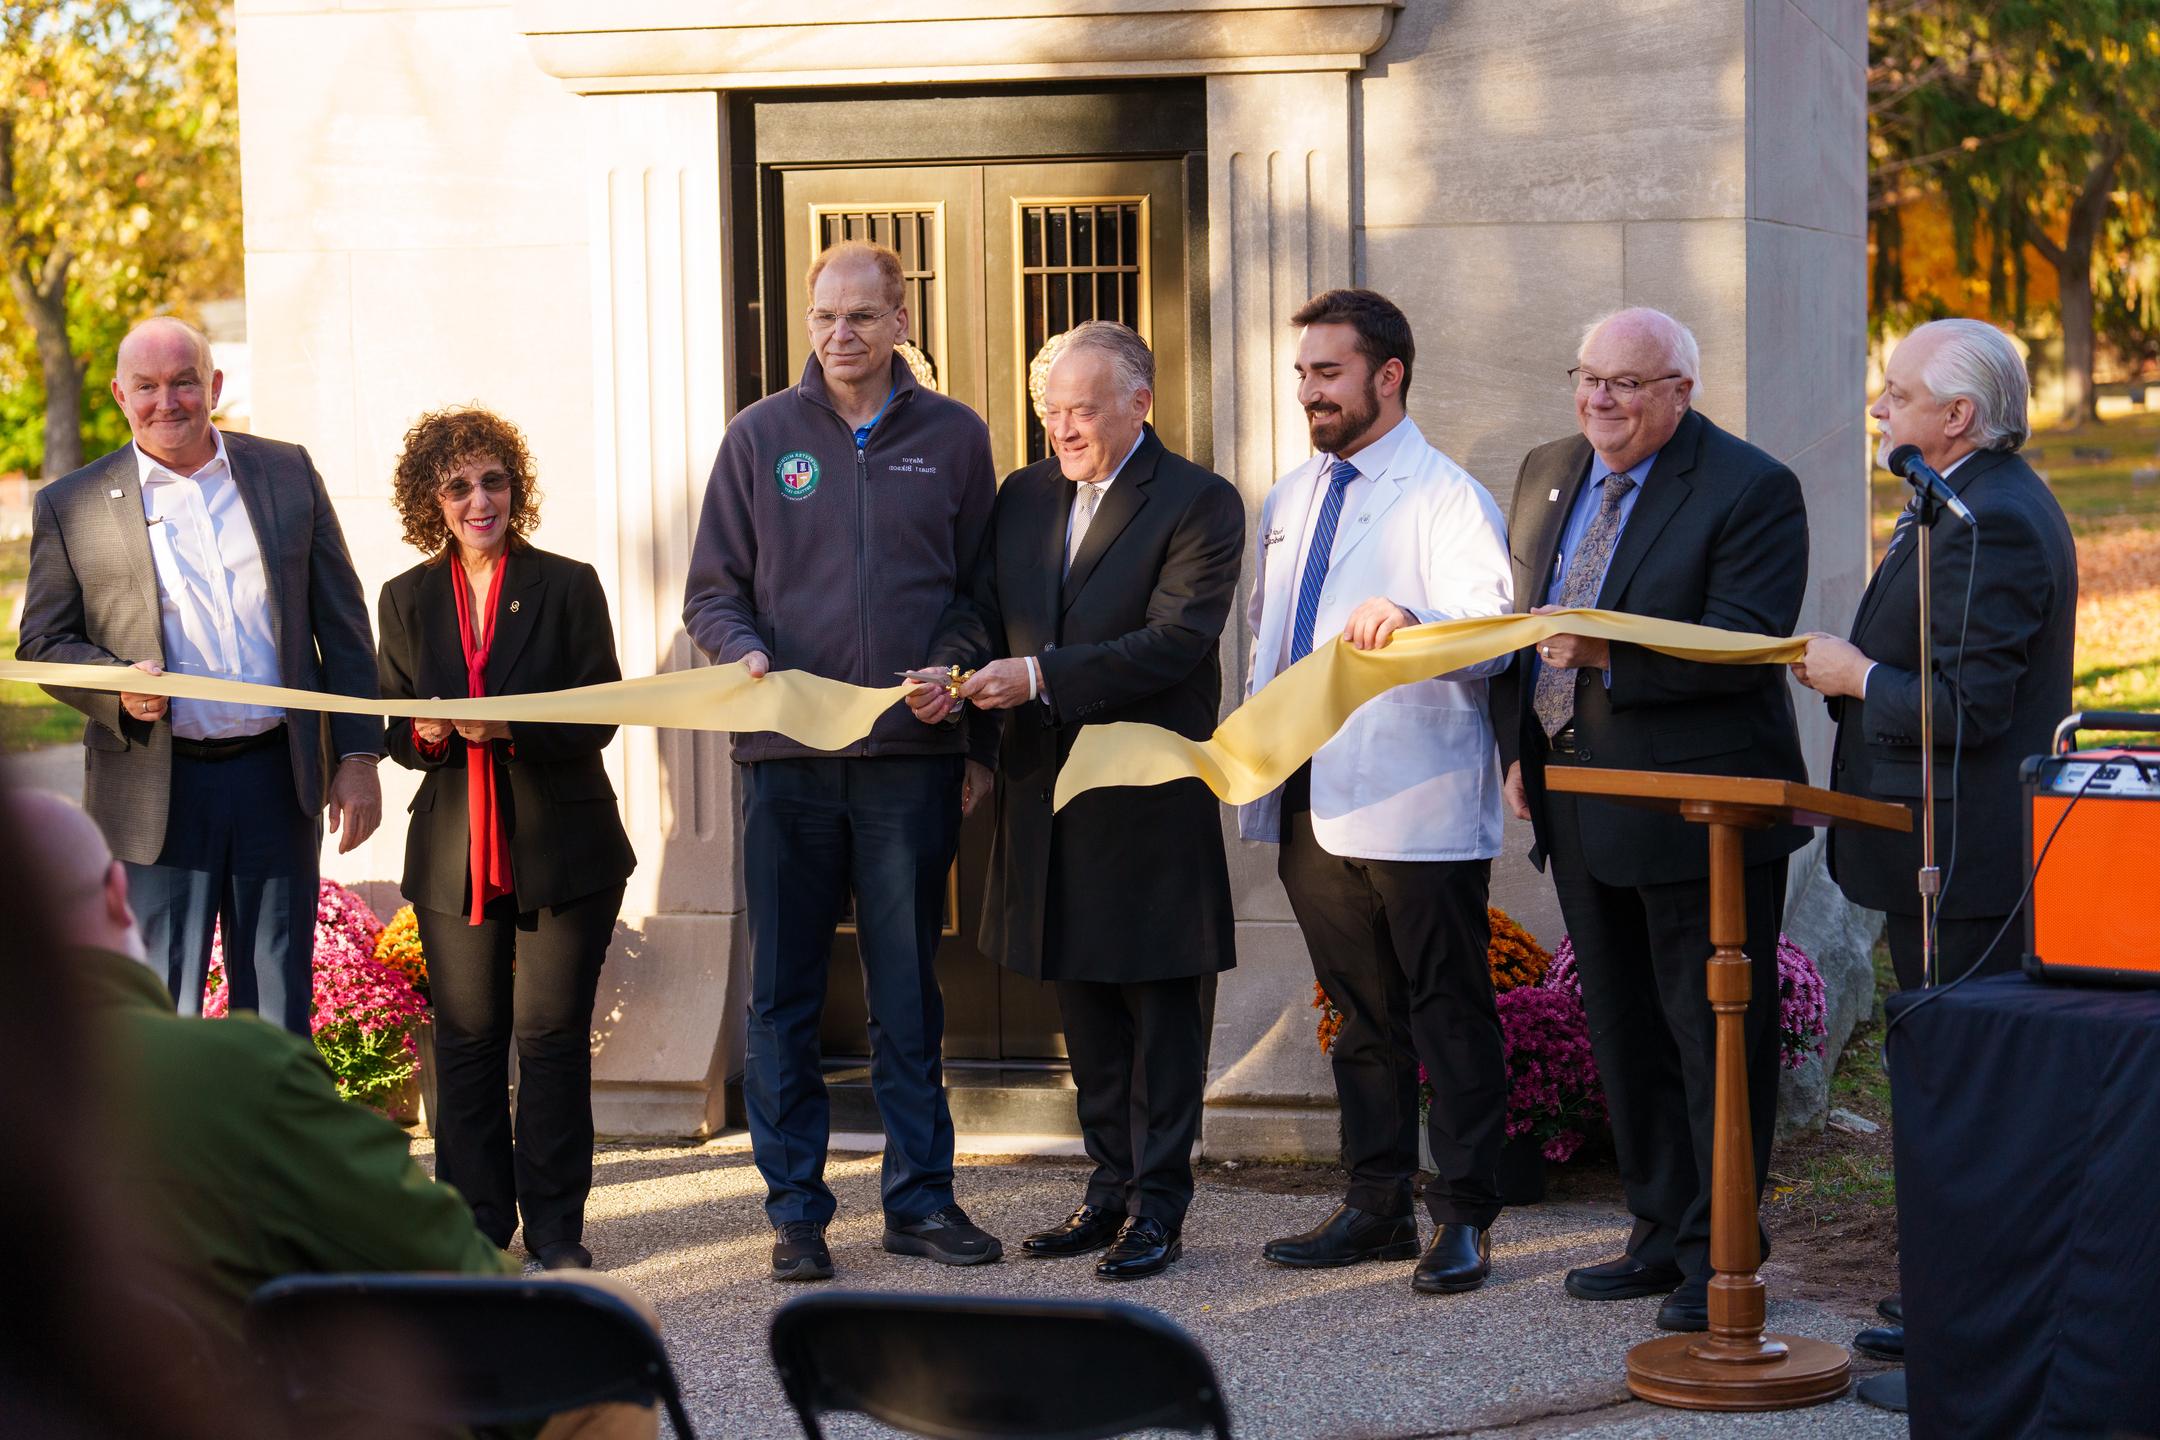 An image of a ribbon being cut in front of the vault